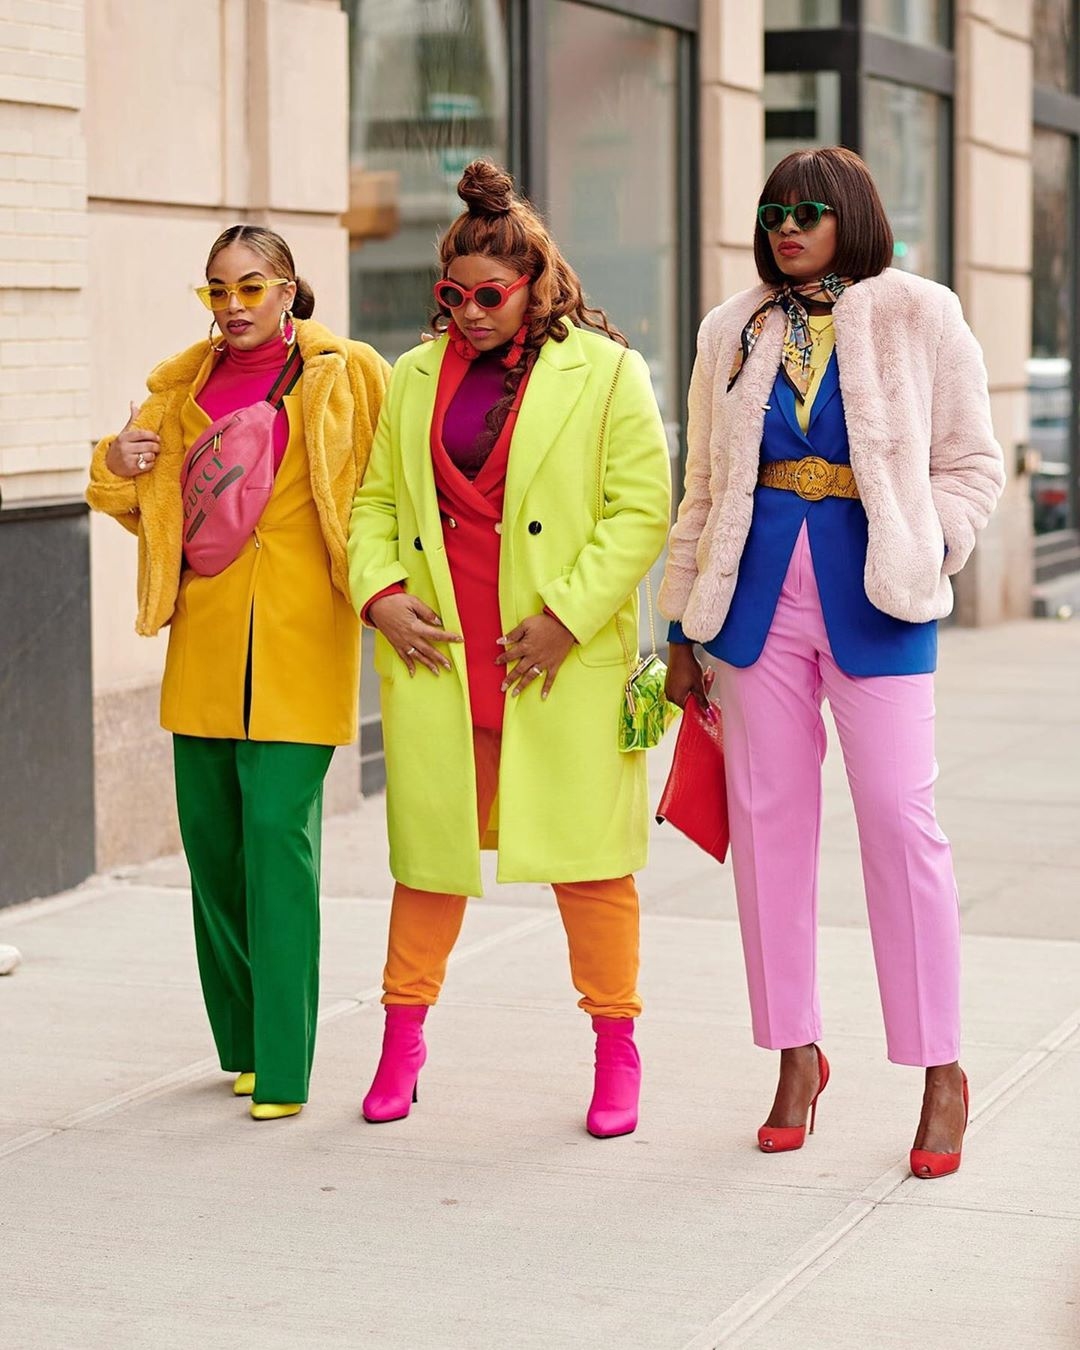 Rave-worthy! See The Best 2020 NYFW Street Style